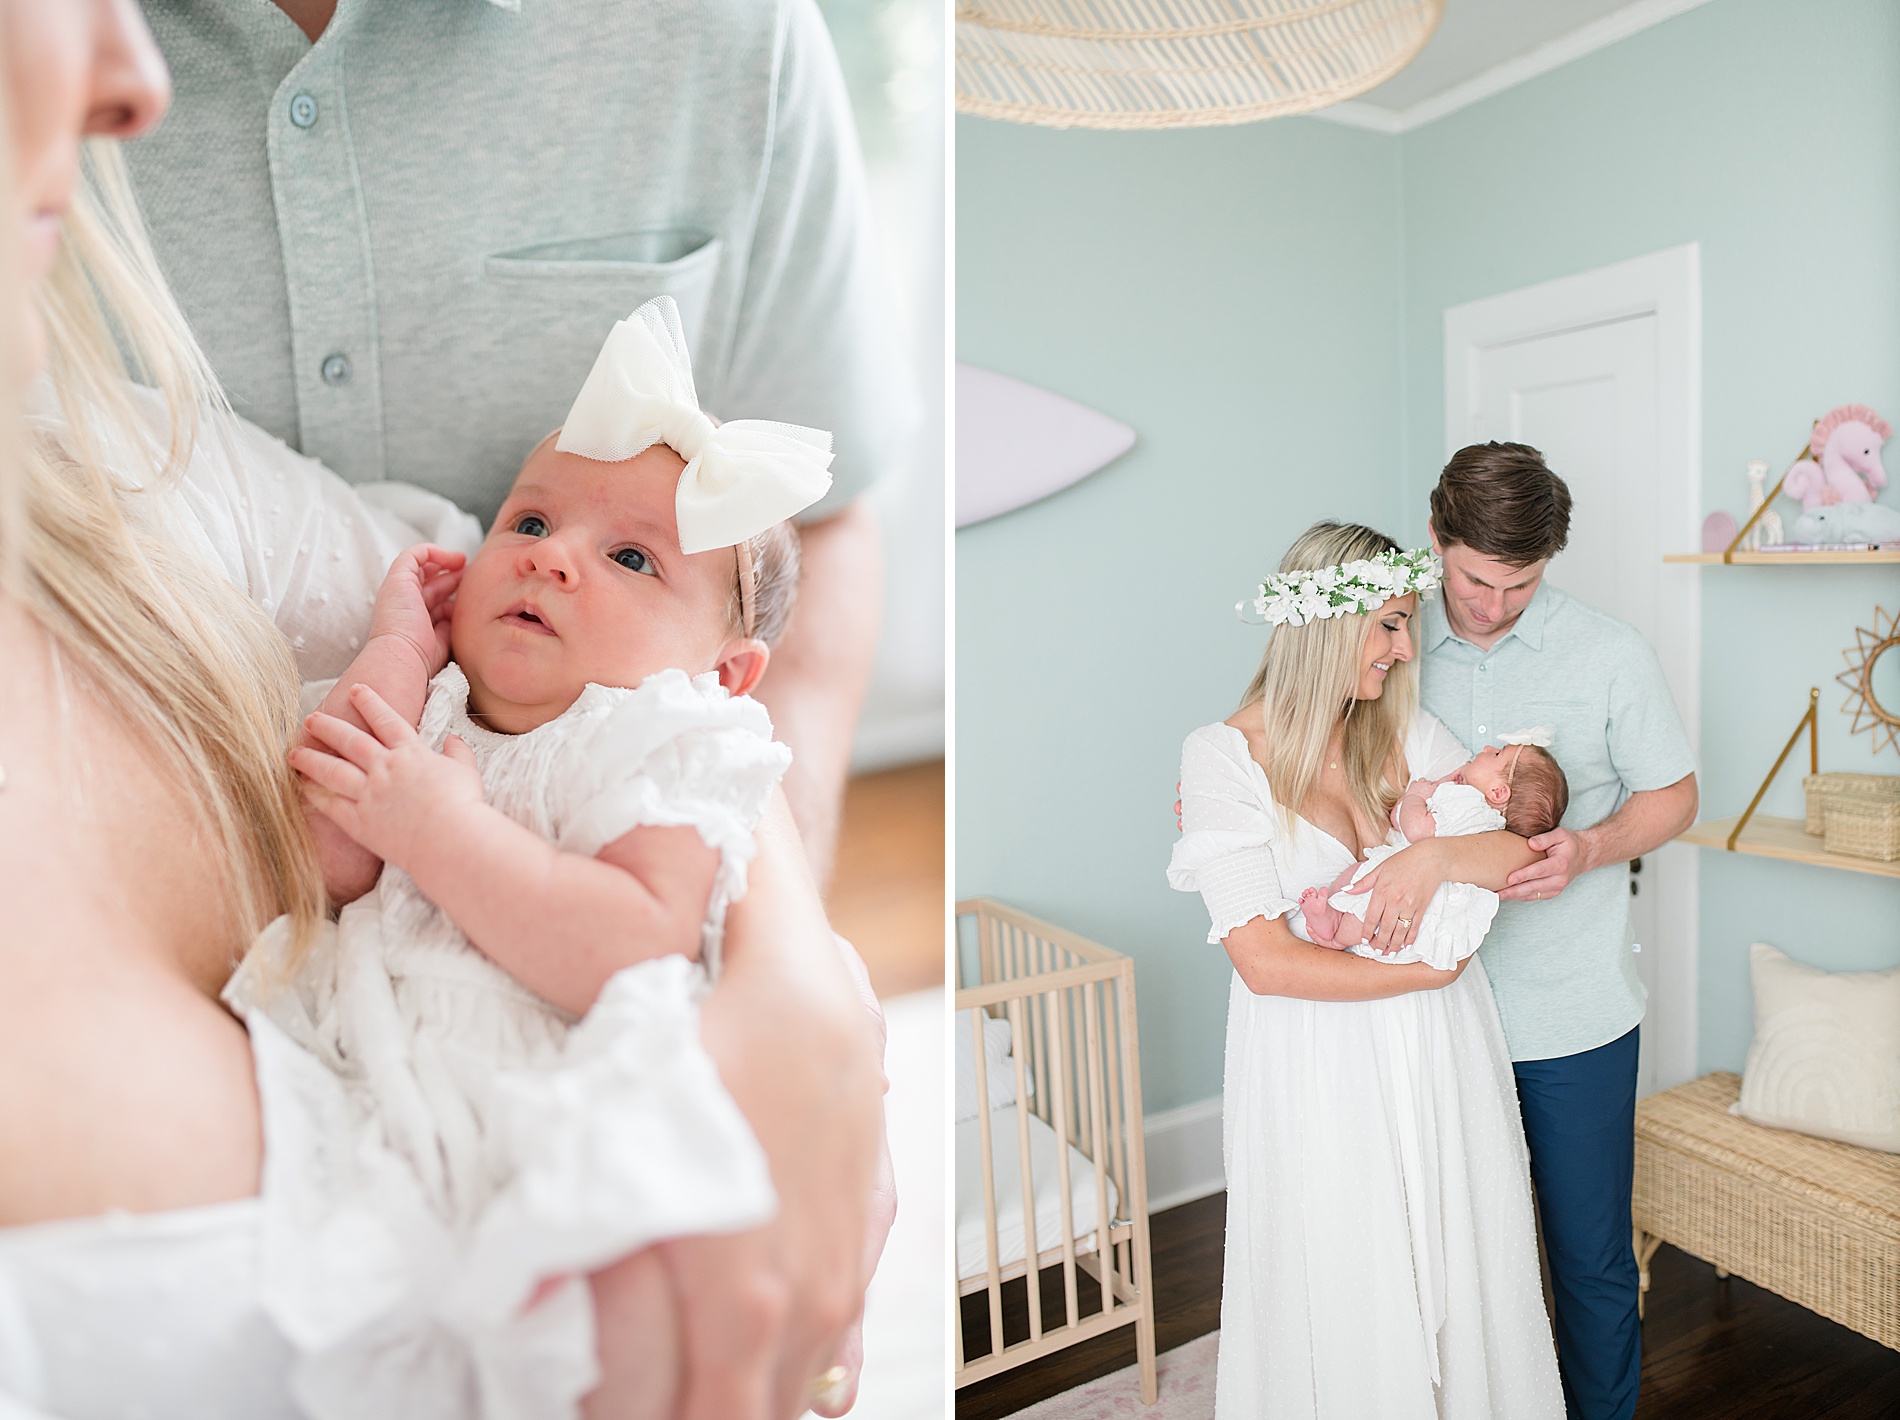 parents hold baby girl in nursery during in-home newborn session photographed by Dallas Newborn Photographer, Lindsey Dutton Photography